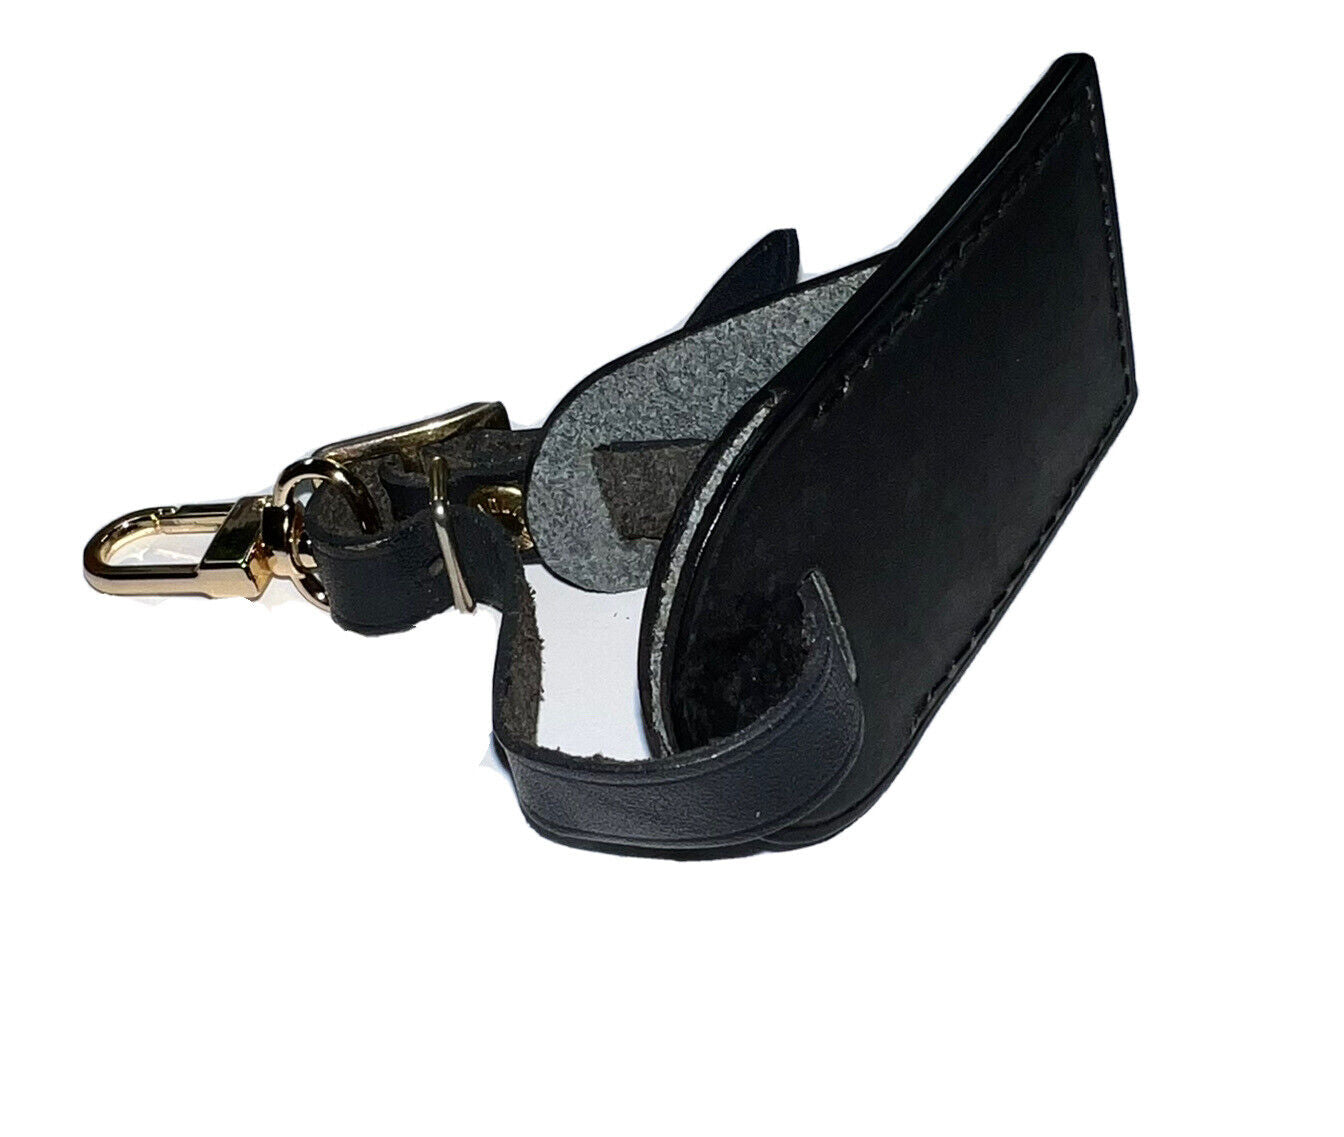 Louis Vuitton Luggage Tag Black Calfskin w/ Initials as pictured- Small